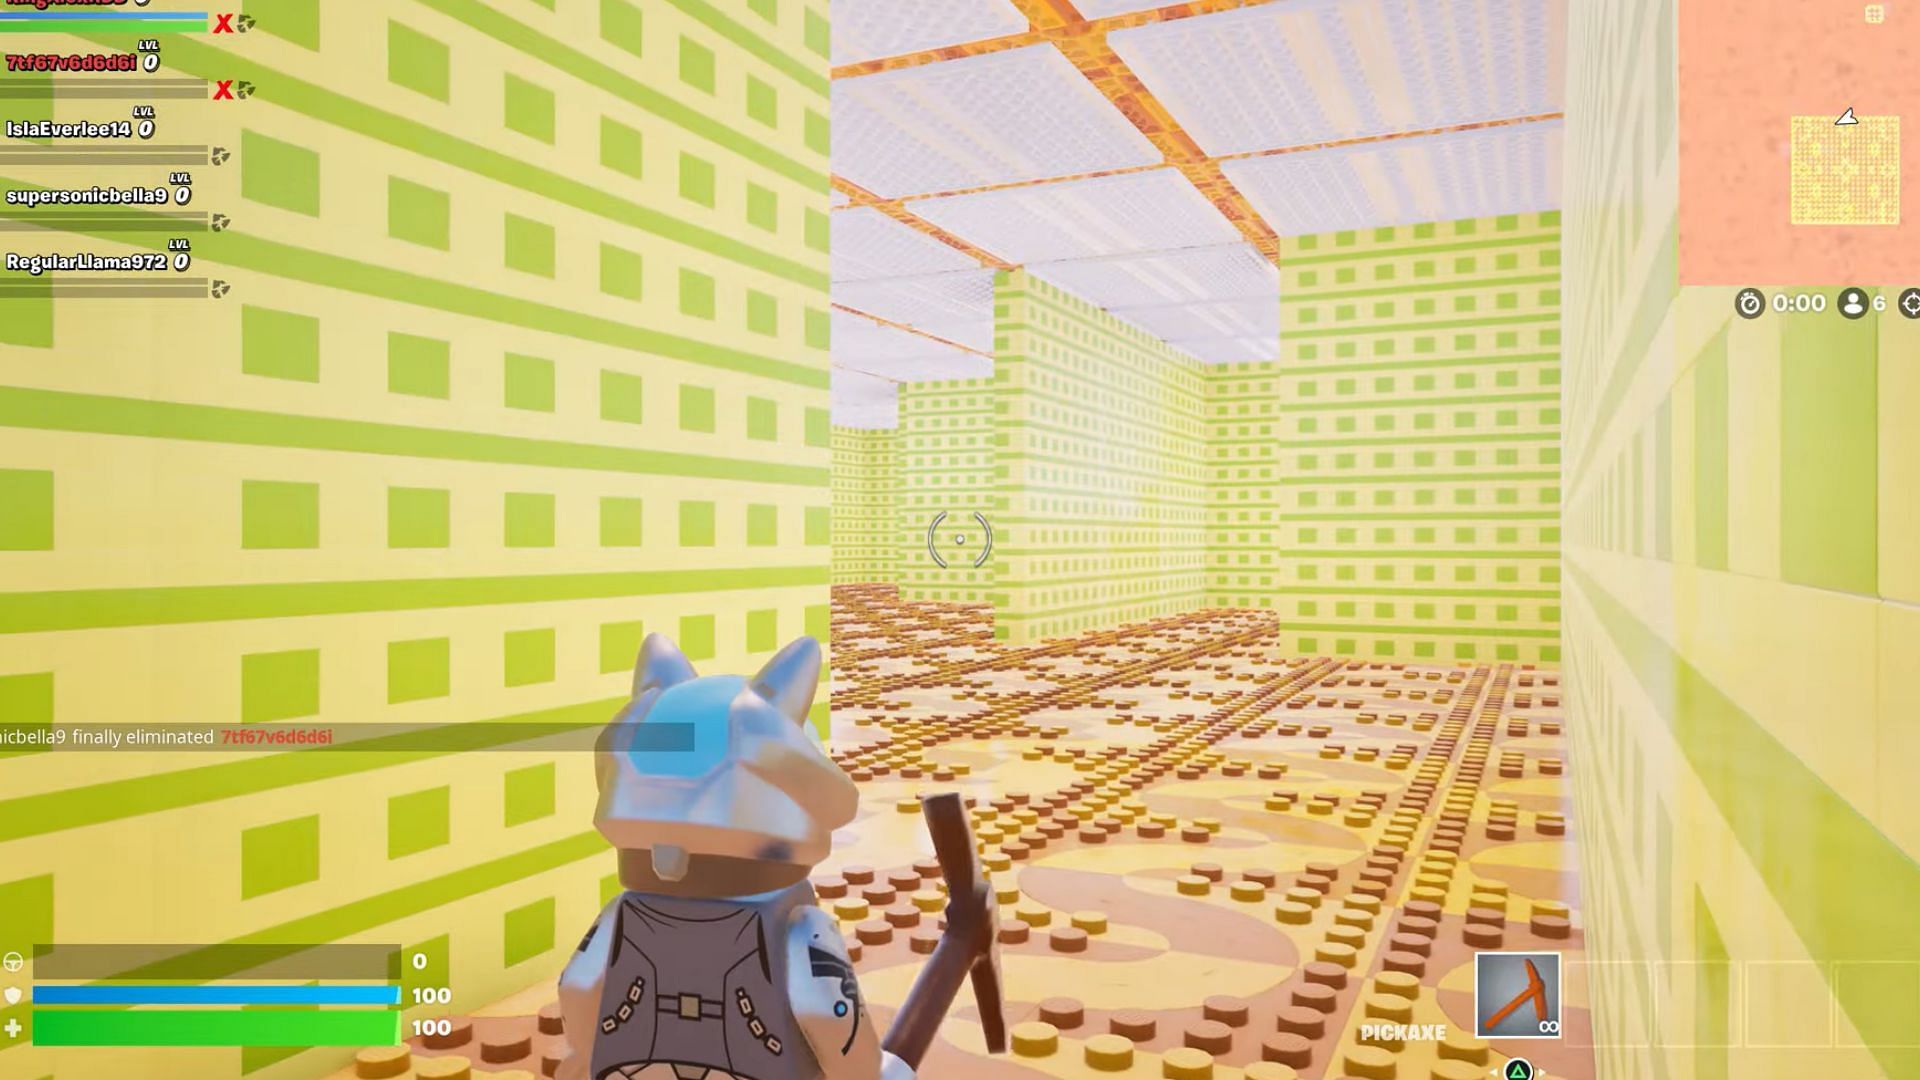 The LEGO Blocks Backroom map has been designed to resemble the iconic location (Image via KingAlexHD on YouTube)